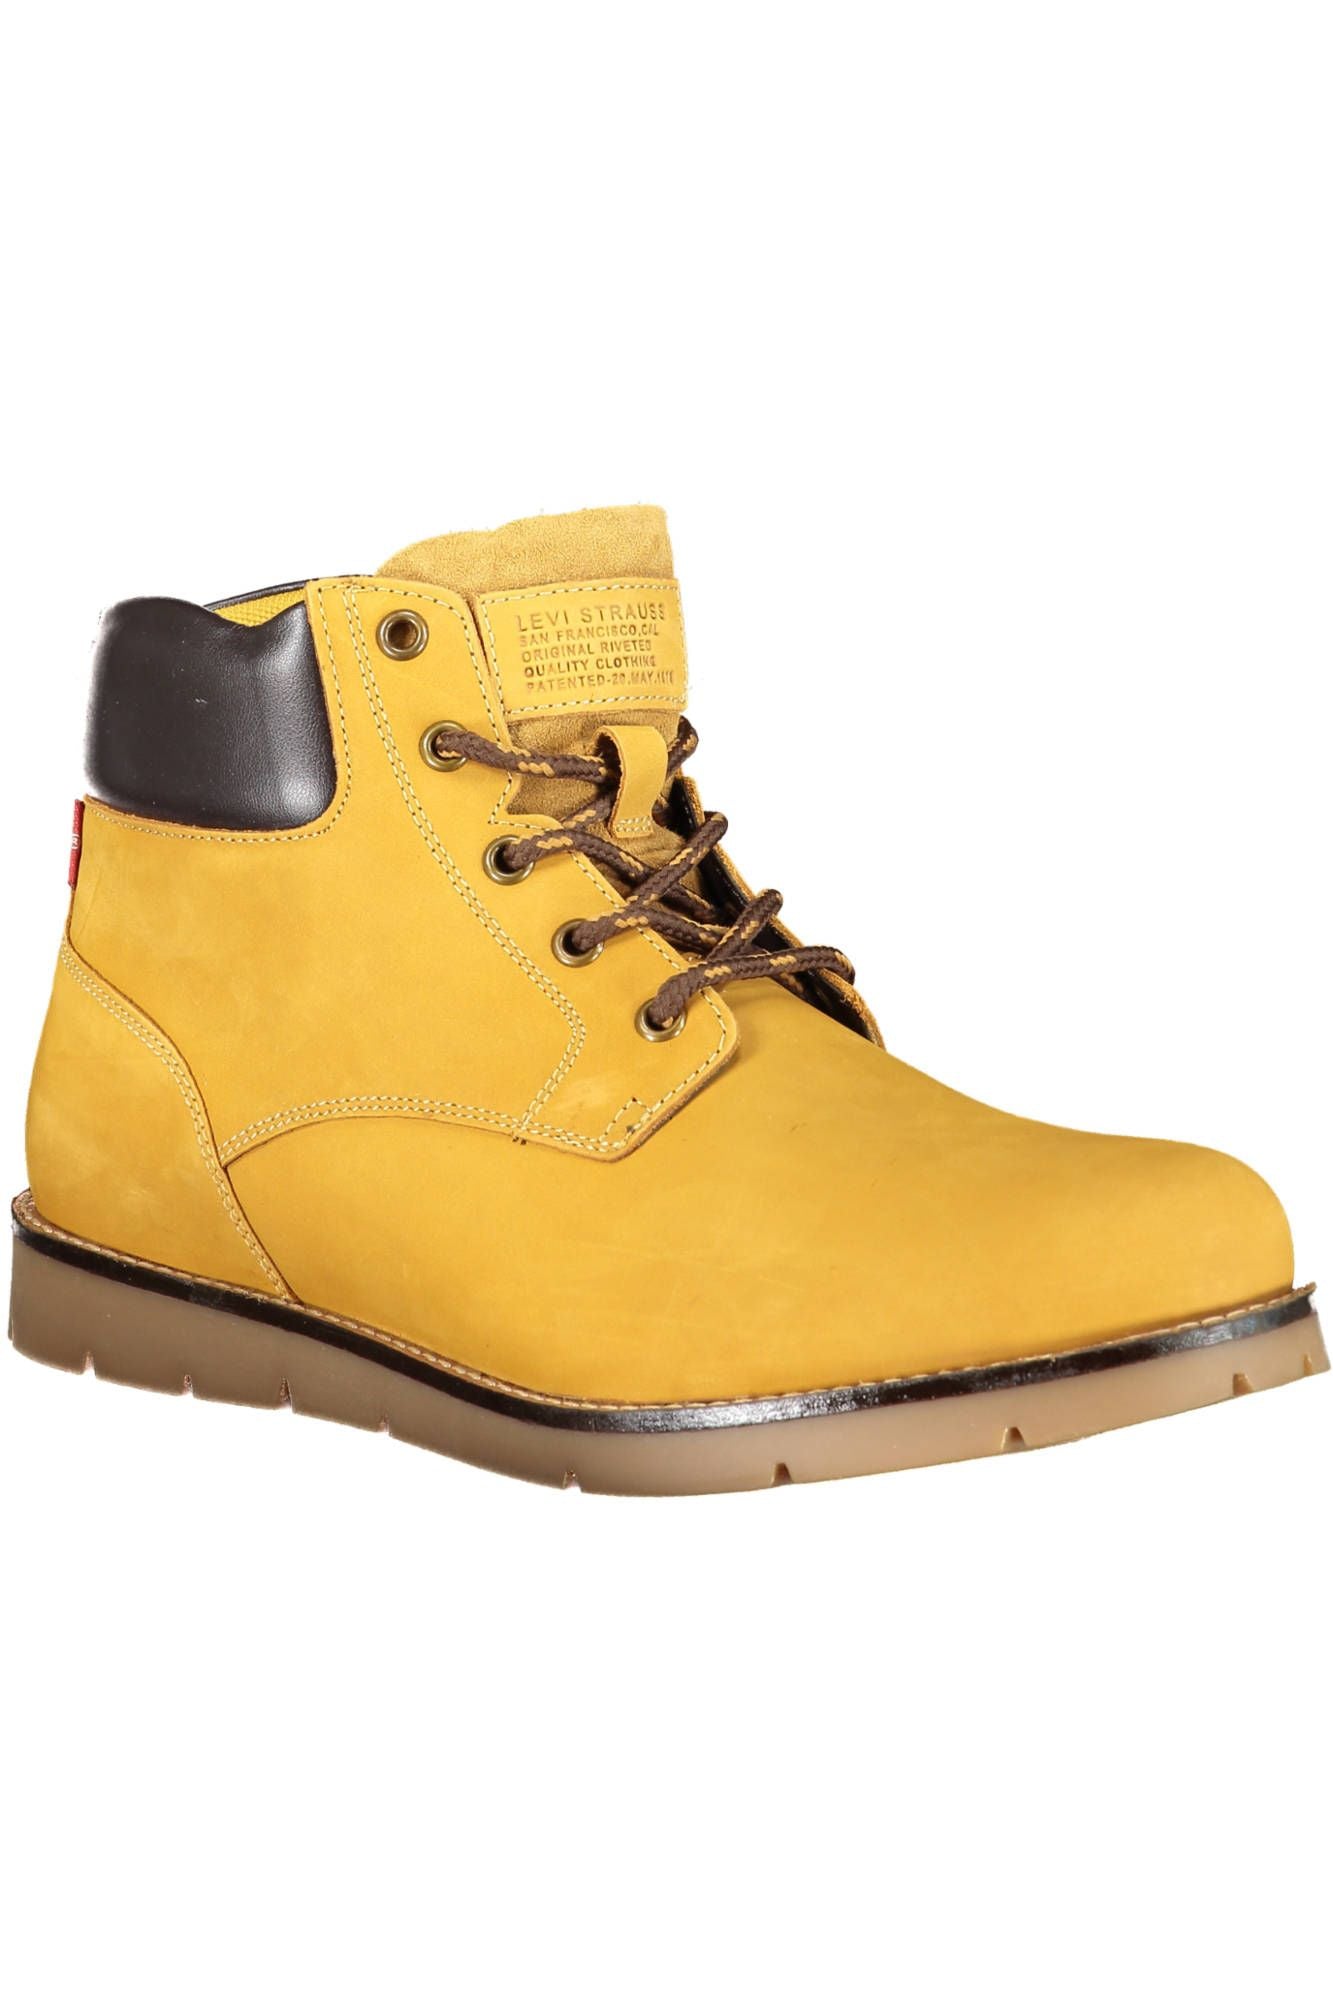 Sunset Yellow Ankle Boots with Lace-Up Detail - Divitiae Glamour